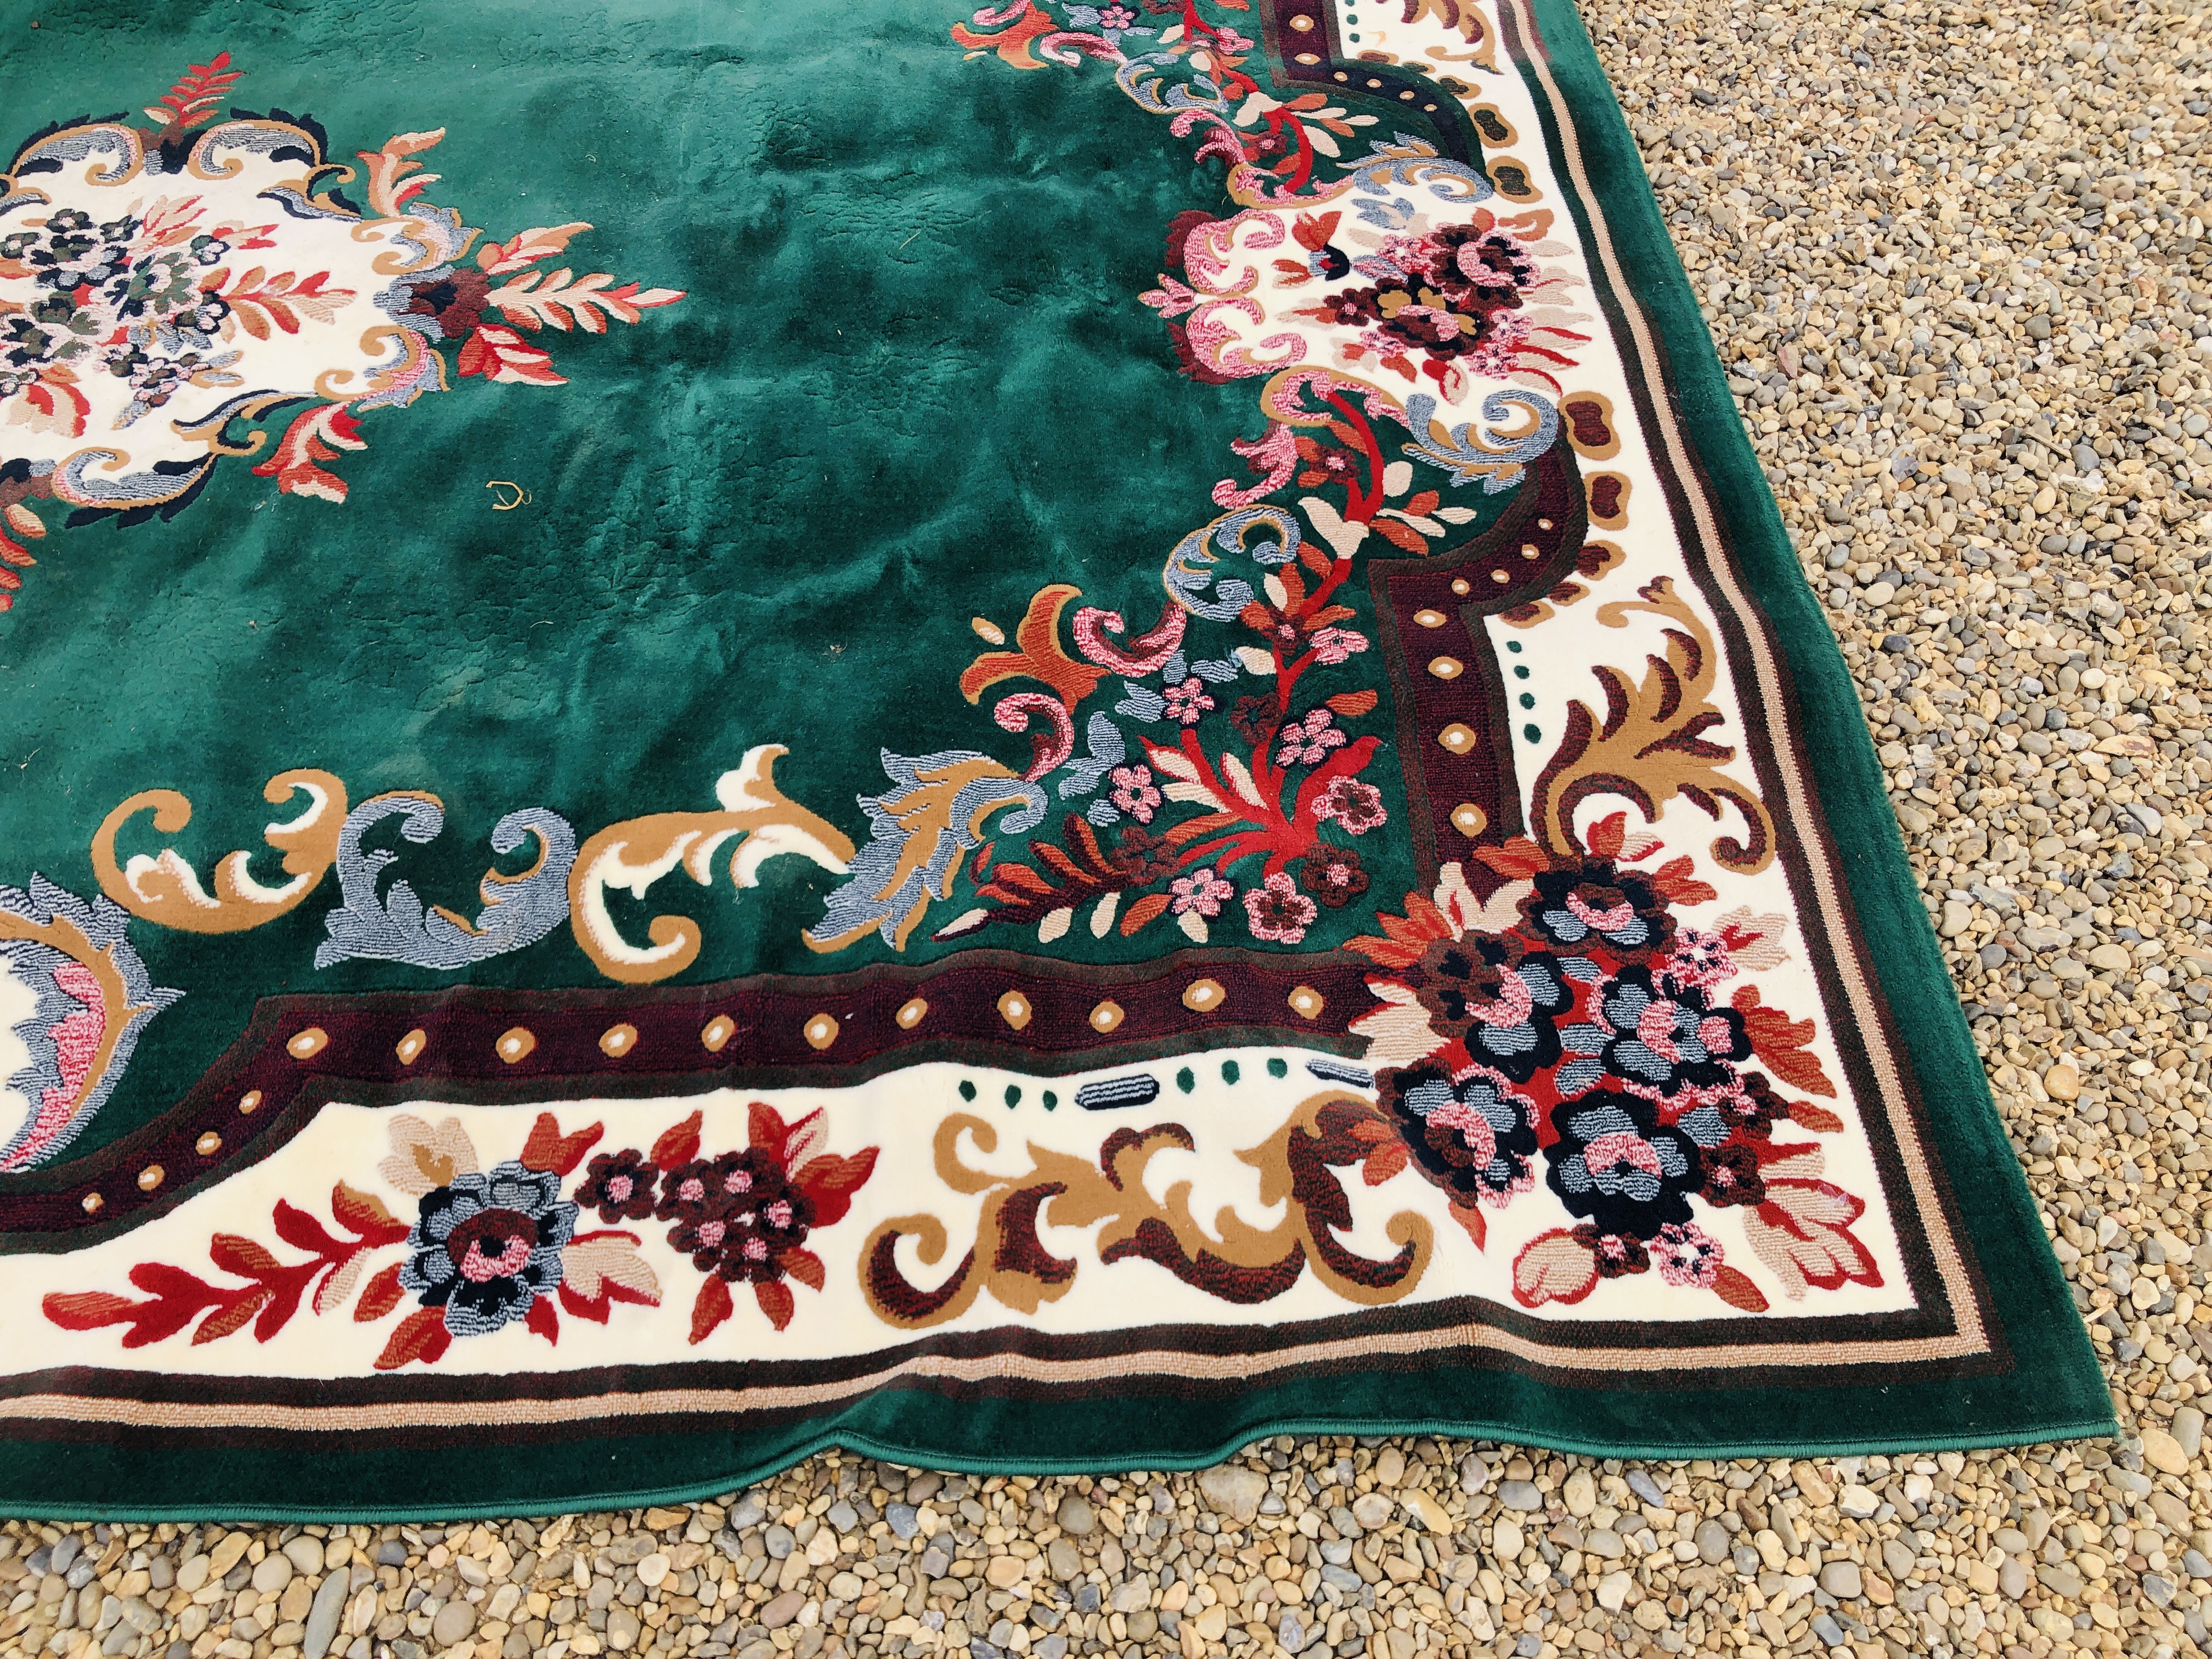 A MODERN CHINESE GARDEN CARPET SQUARE IN EMERALD GREEN 380/280. - Image 2 of 7